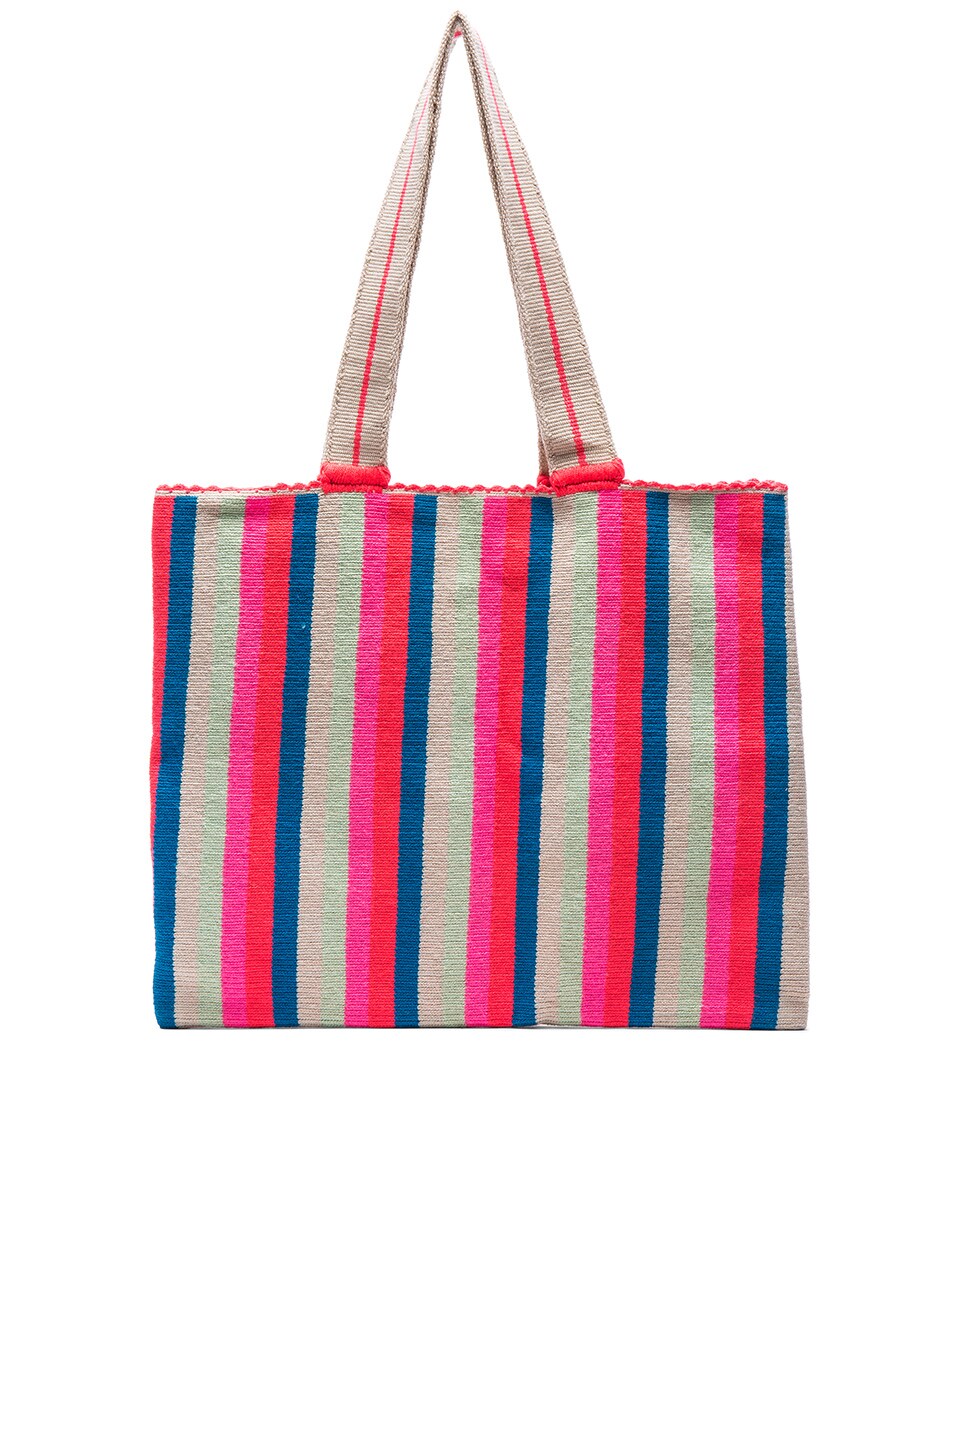 Image 1 of Sophie Anderson Alula Tote in Coral Lime & Royal Blue